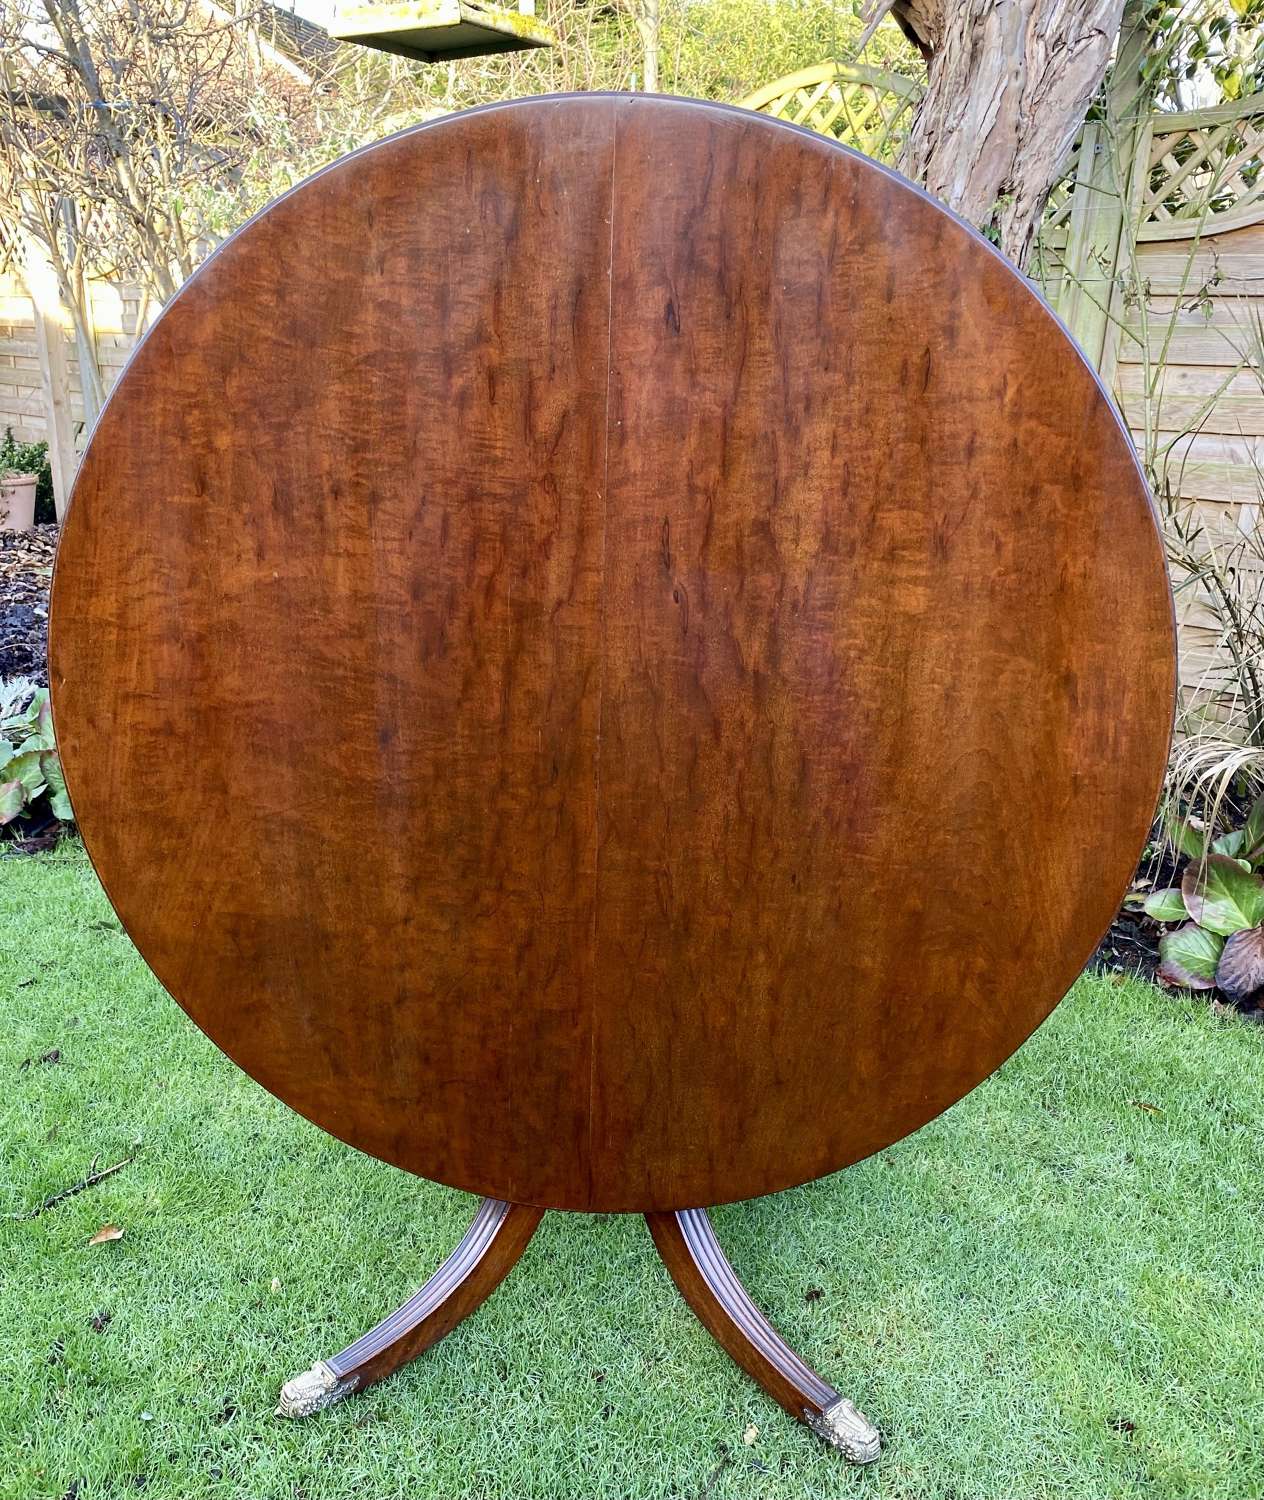 Plum pudding mahogany centre or breakfast table